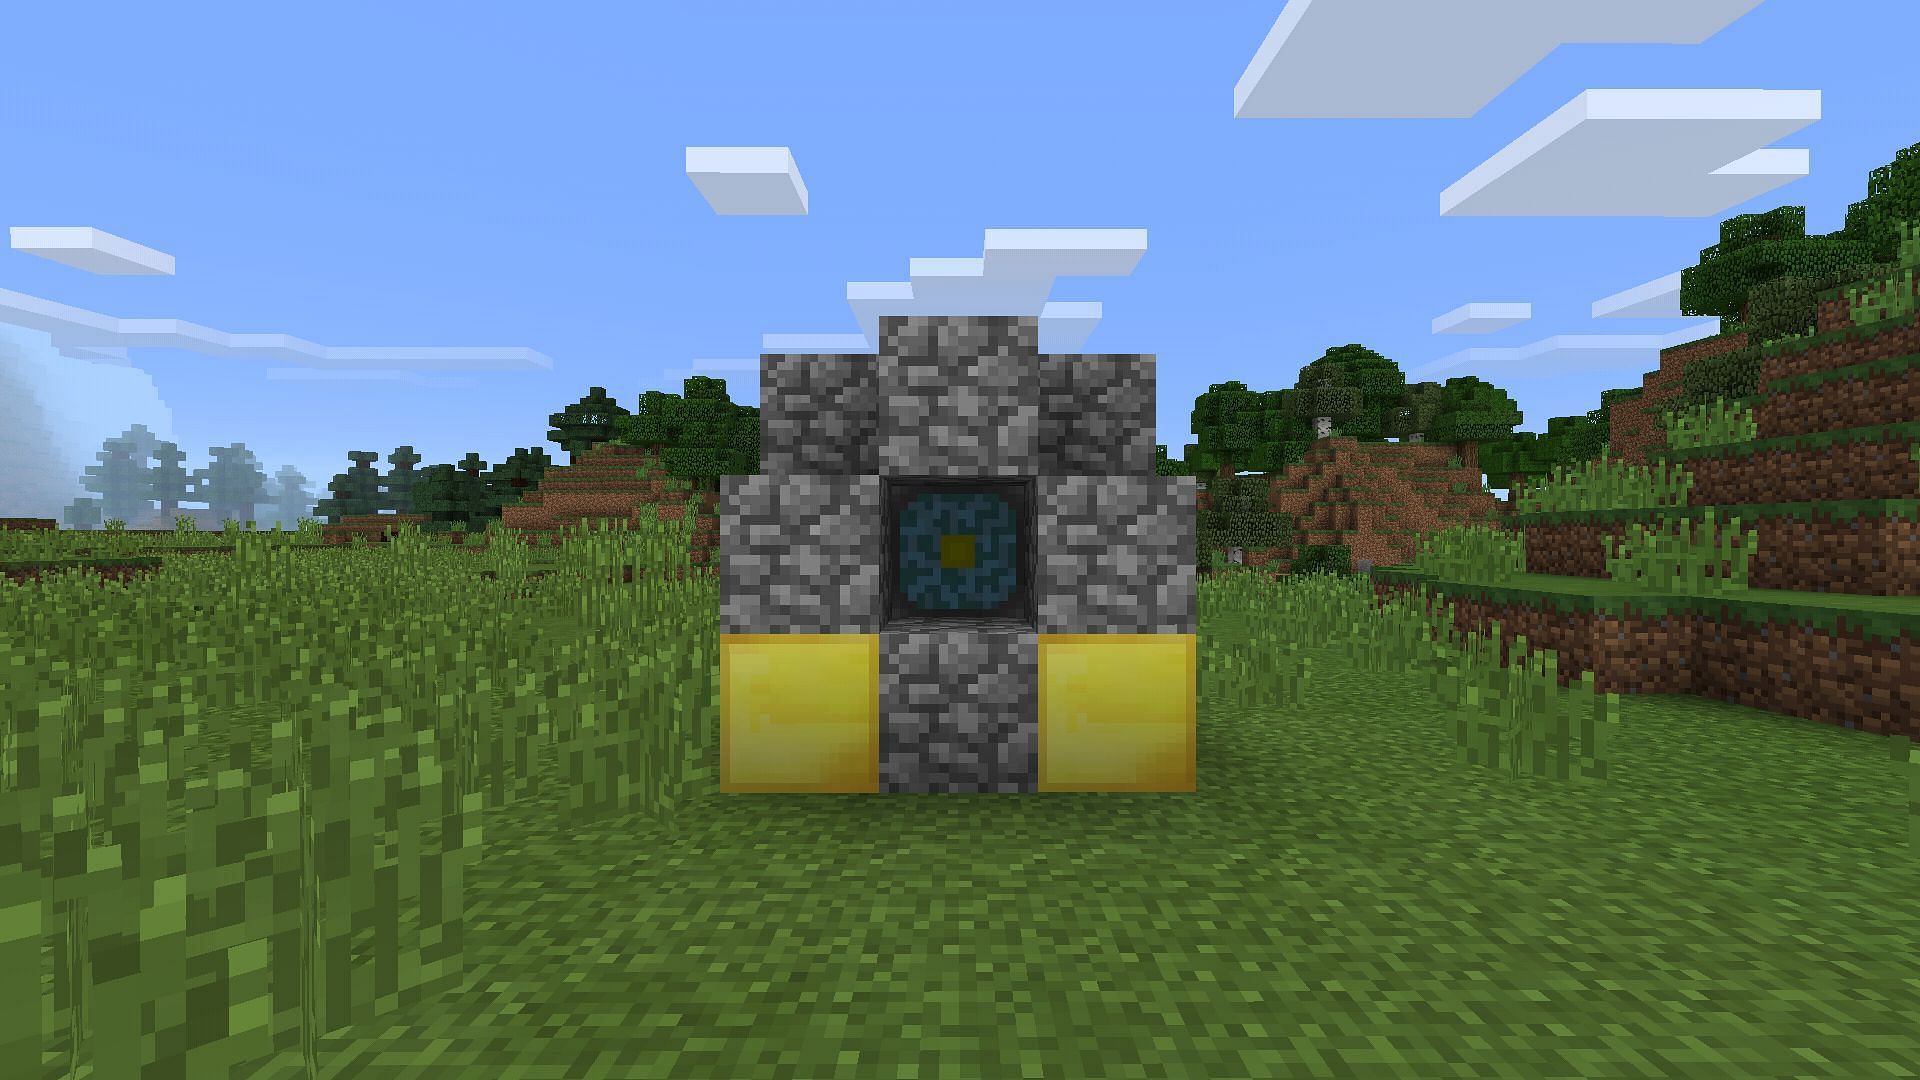 The nether reactor block needed to be set up in a certain way to summon the nether spire (Image via Mojang Studios)